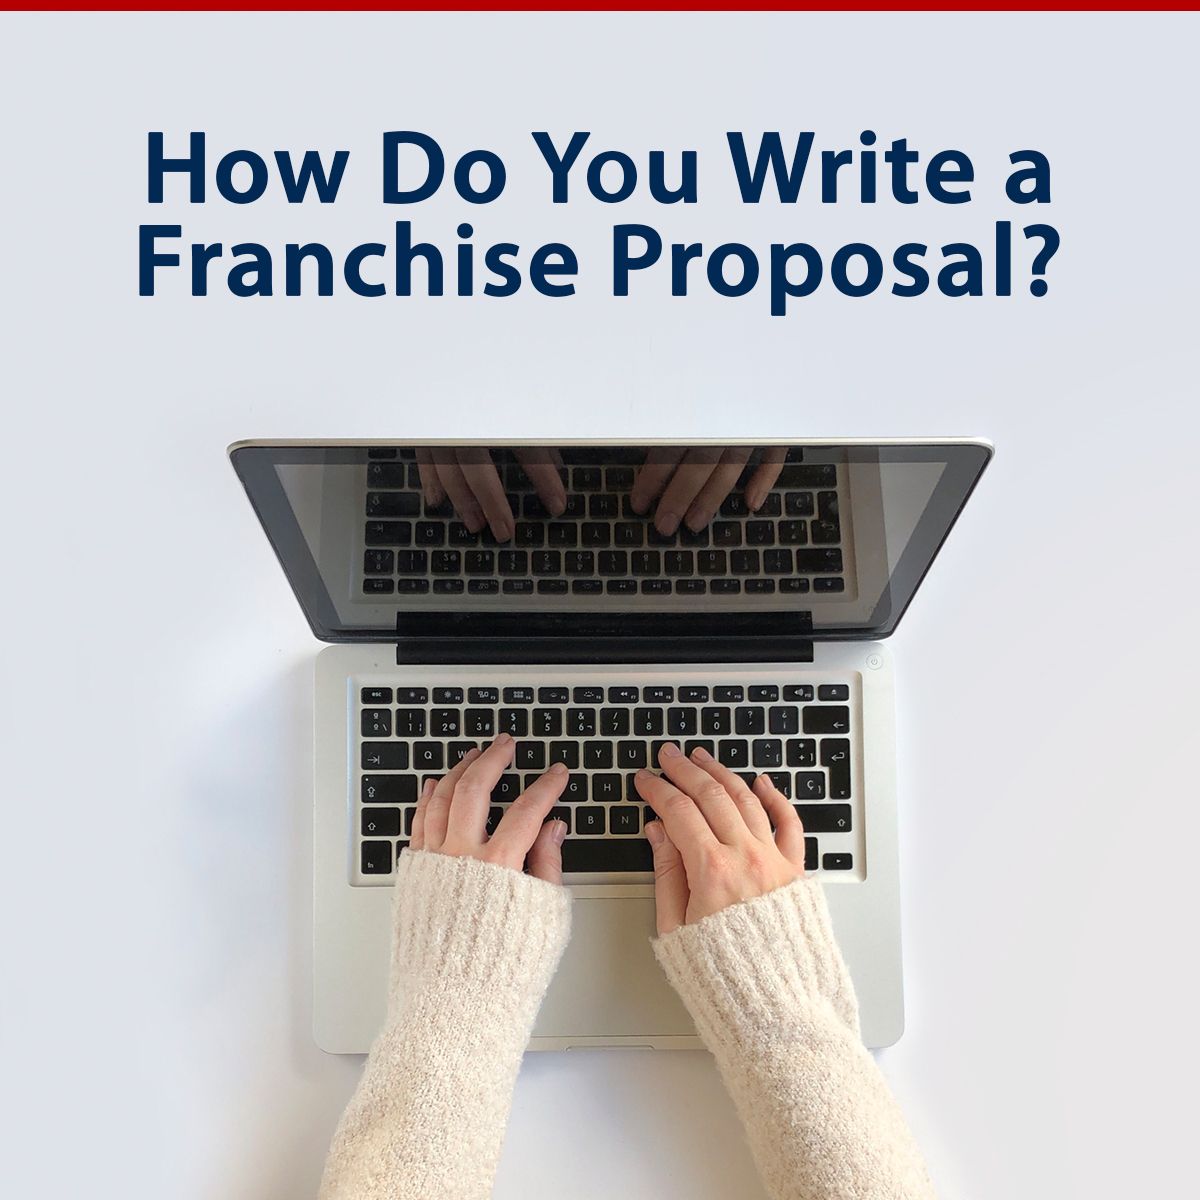 How Do You Write a Franchise Proposal?